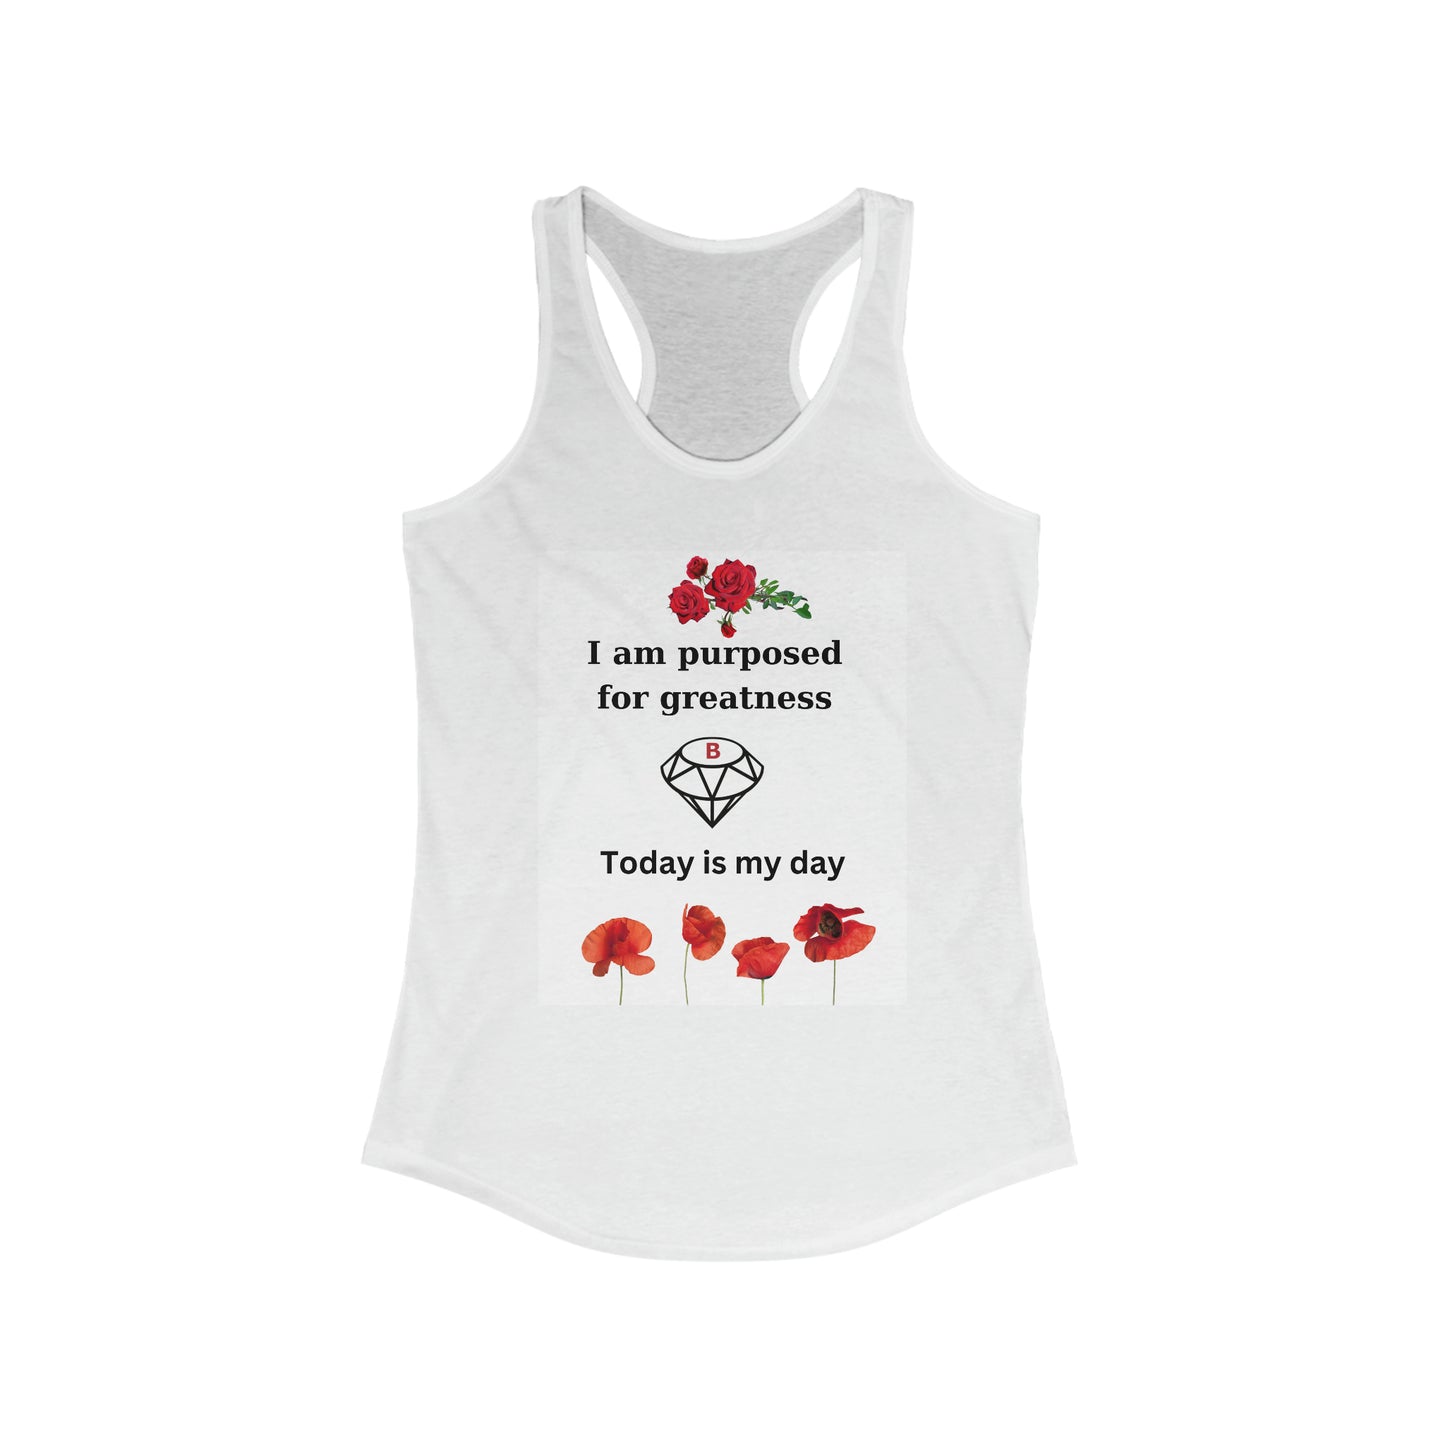 Women's Ideal Racerback Tank Great For The Gym